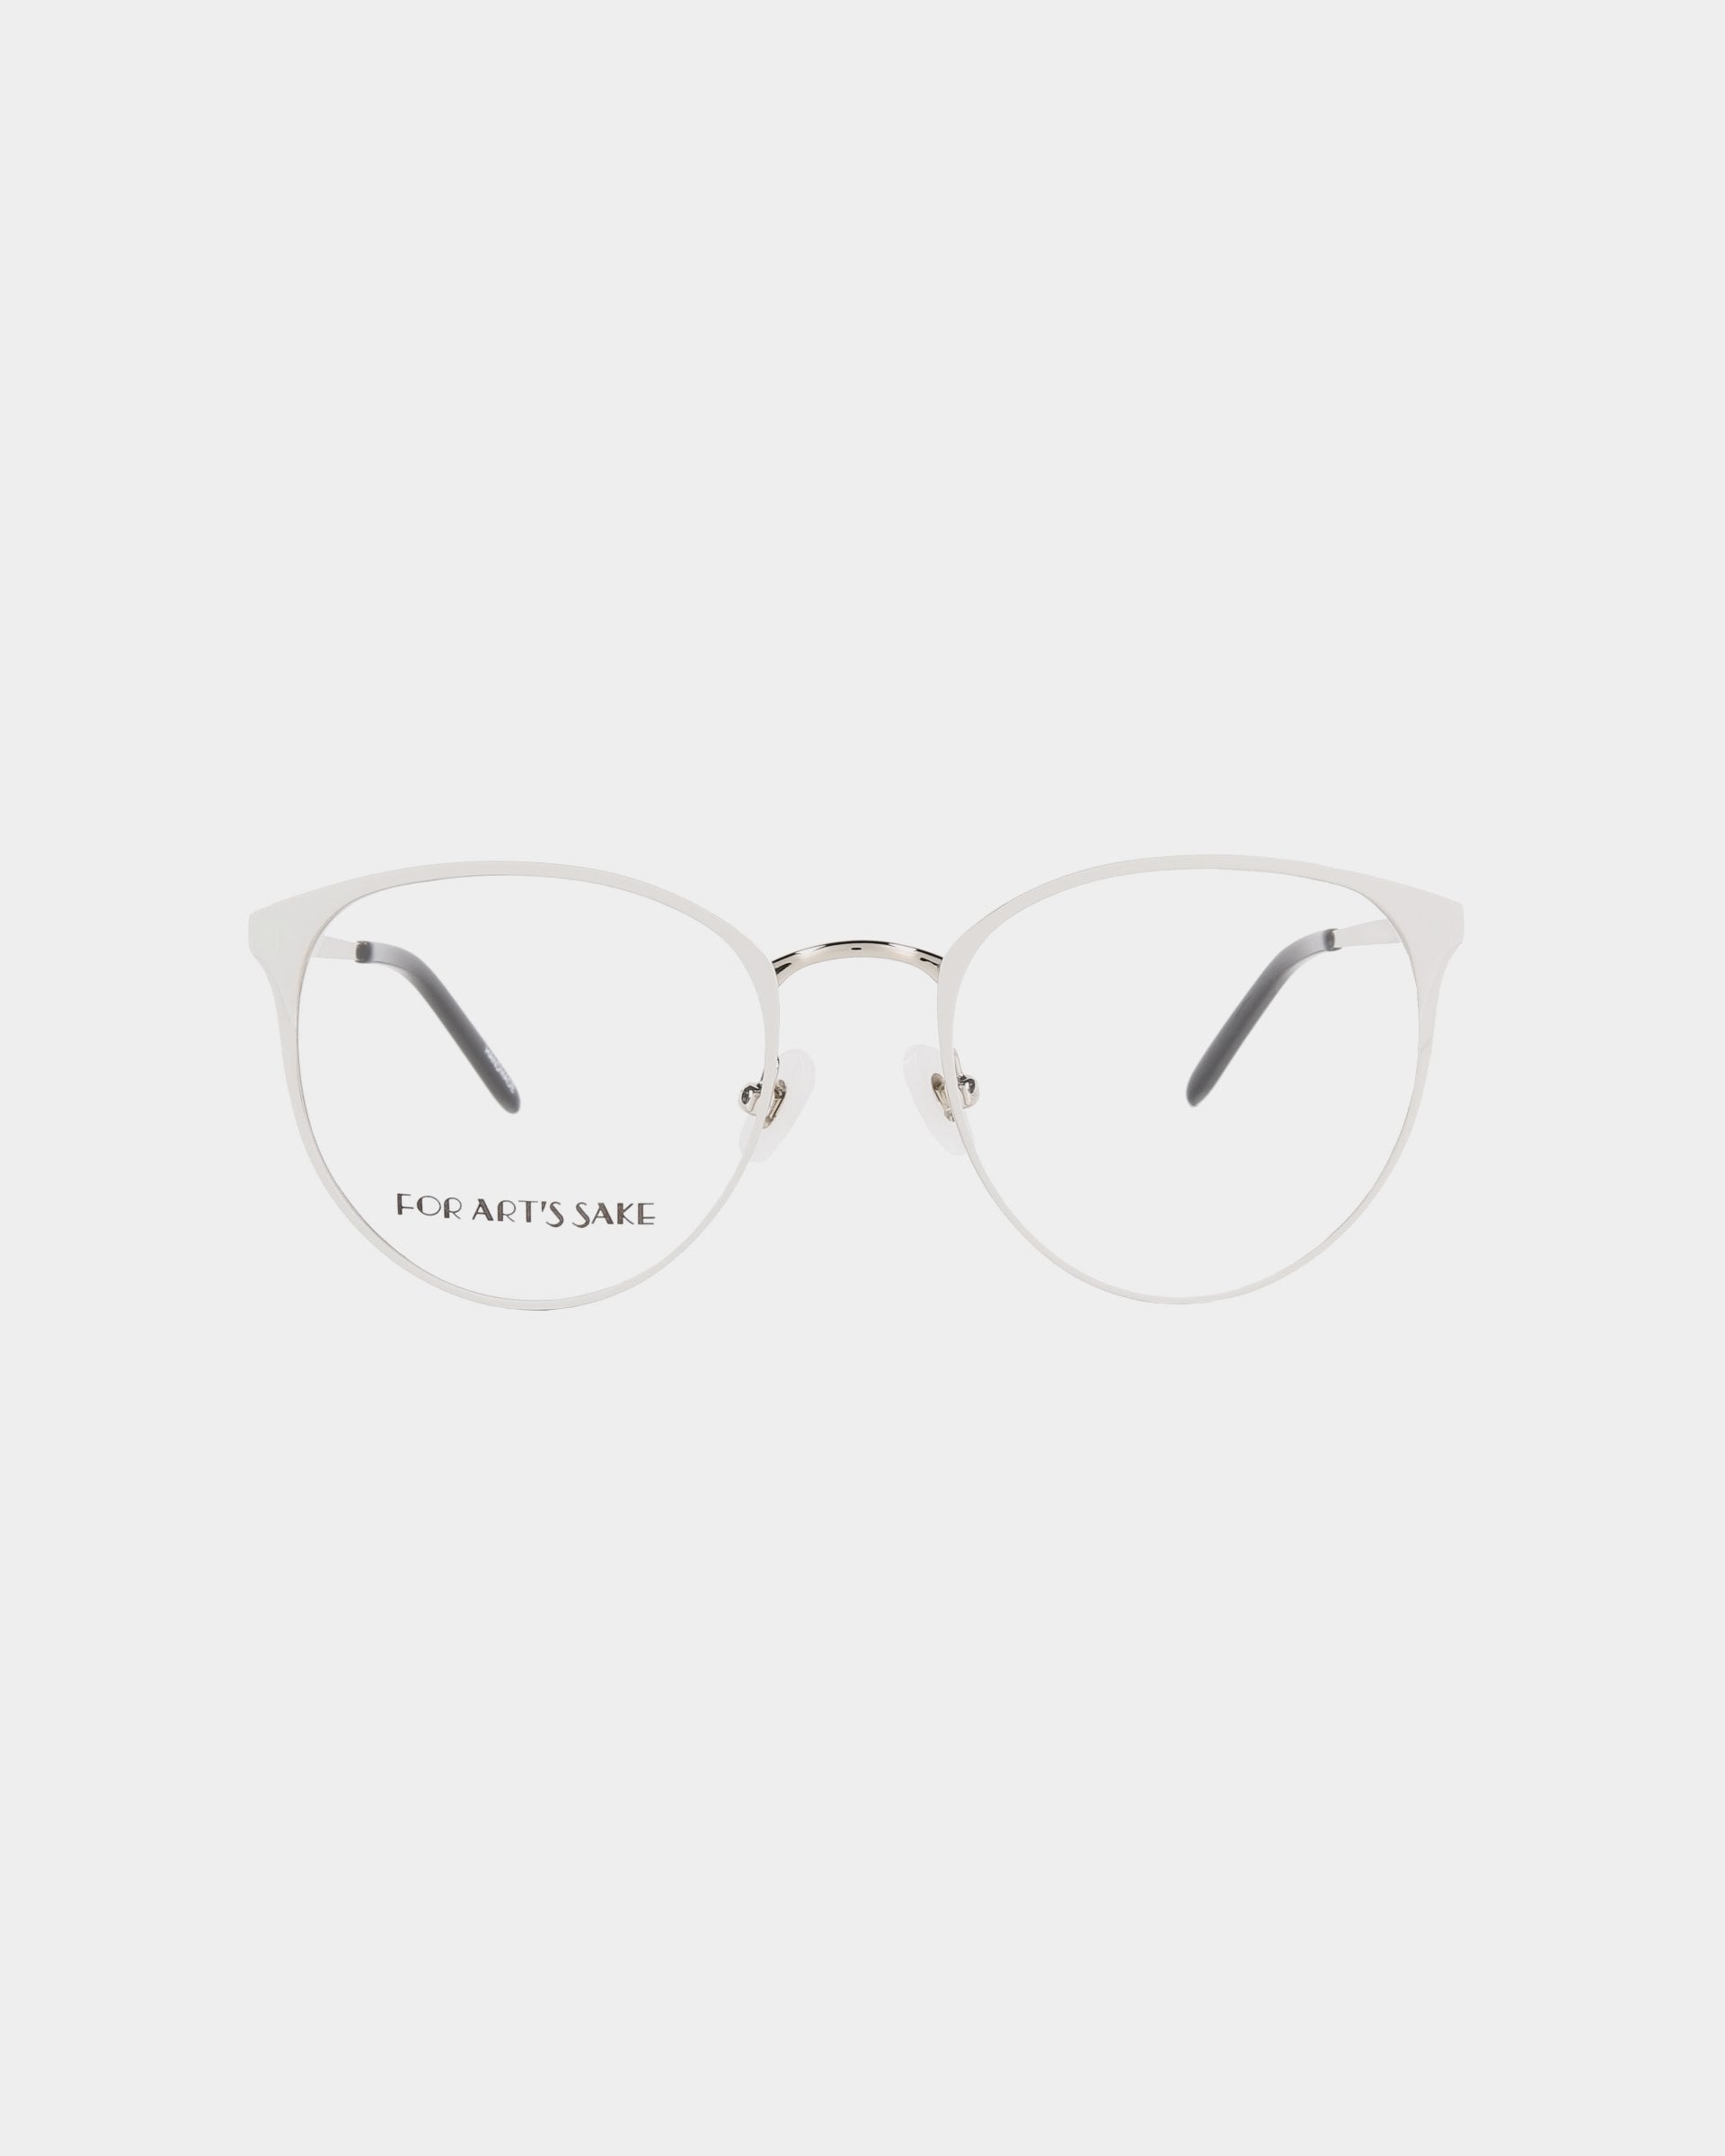 A pair of **For Art's Sake® Olivia Grey** minimalist eyeglasses with round, silver metal frames. The glasses have clear lenses and sleek temples with grey tips. Featuring blue light filter technology, the words "FOR ART'S SAKE" are printed on the left lens. The background is plain white.